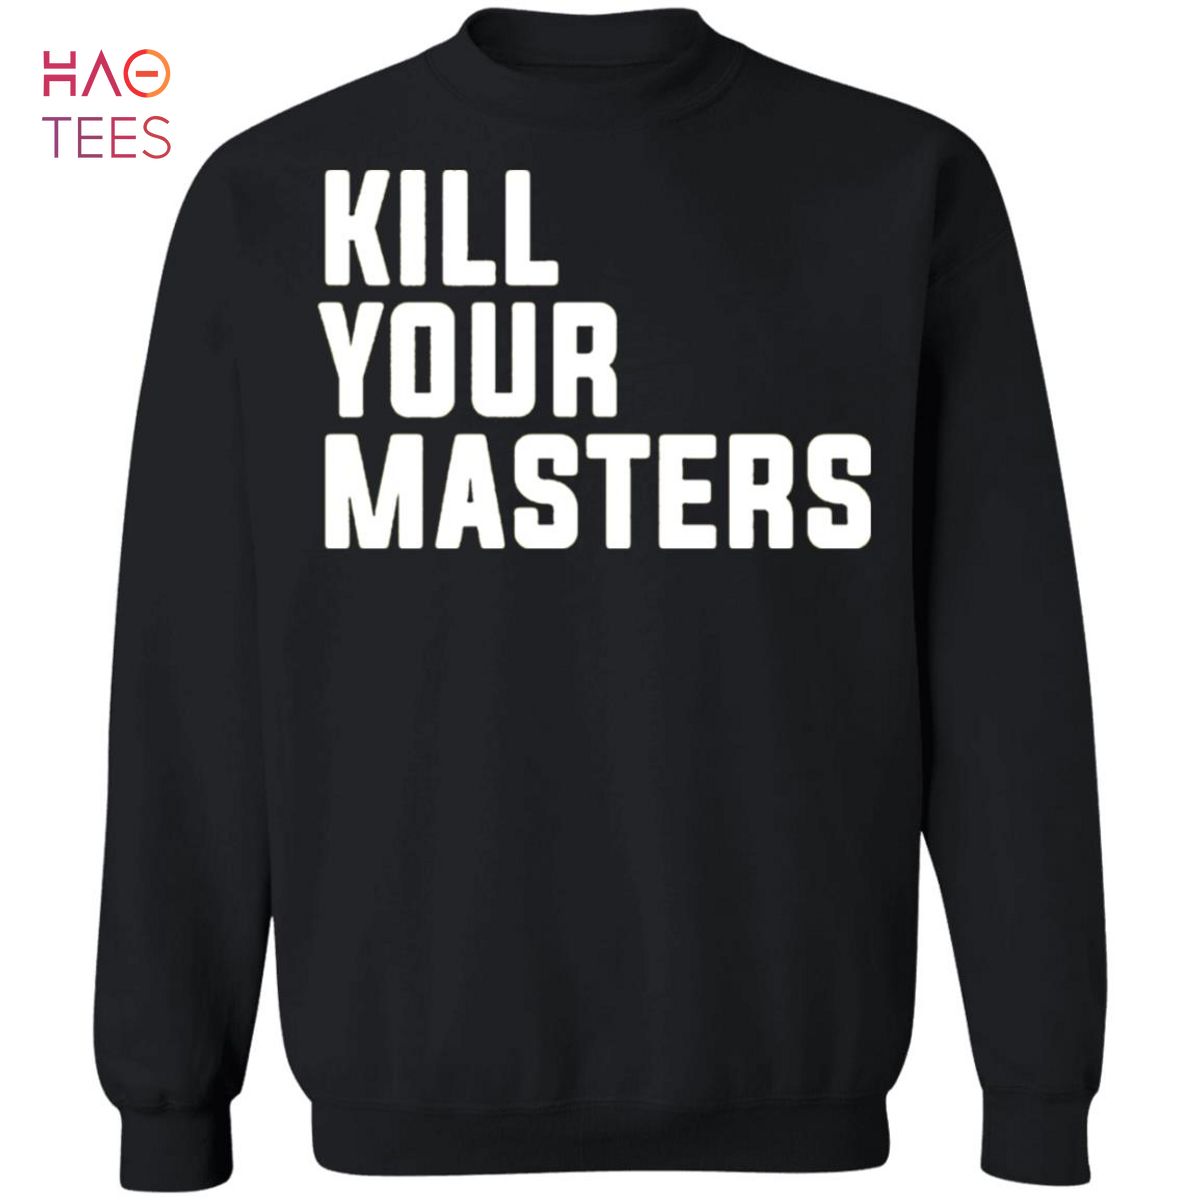 [NEW] Kill Your Masters Sweater